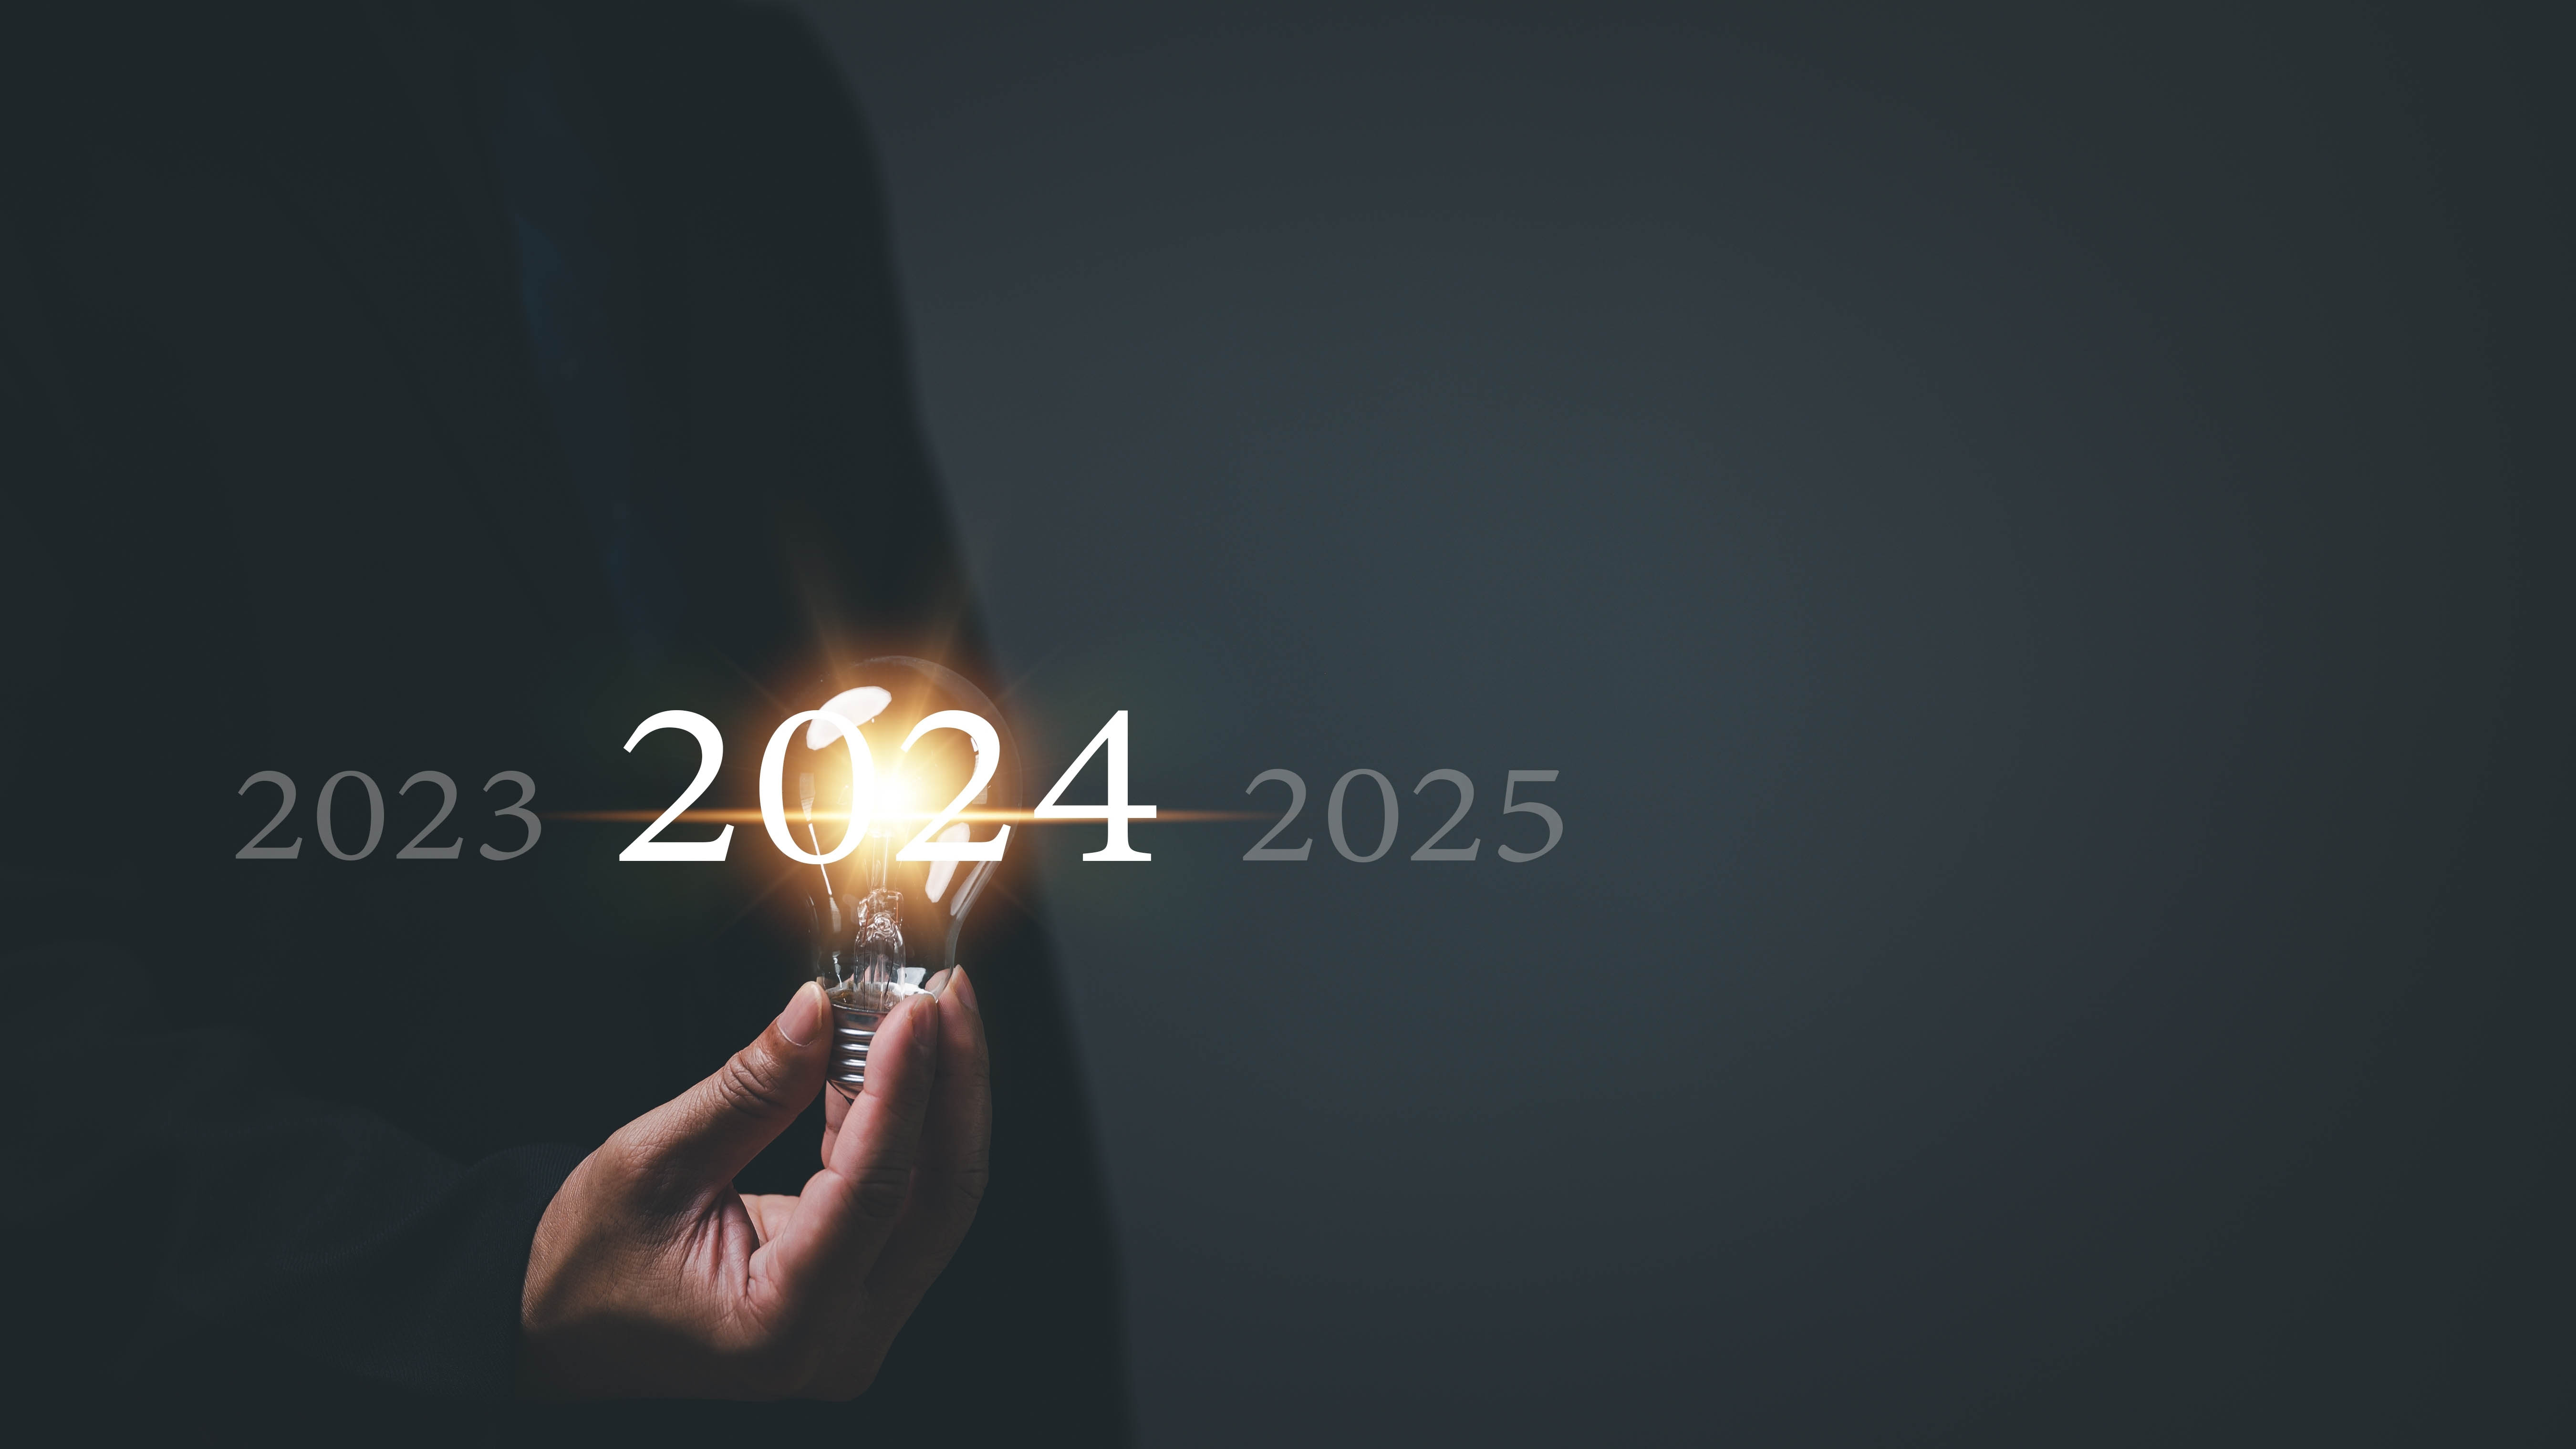 Close-up of a hand holding up a lit lightbulb directly over the numbers 2024